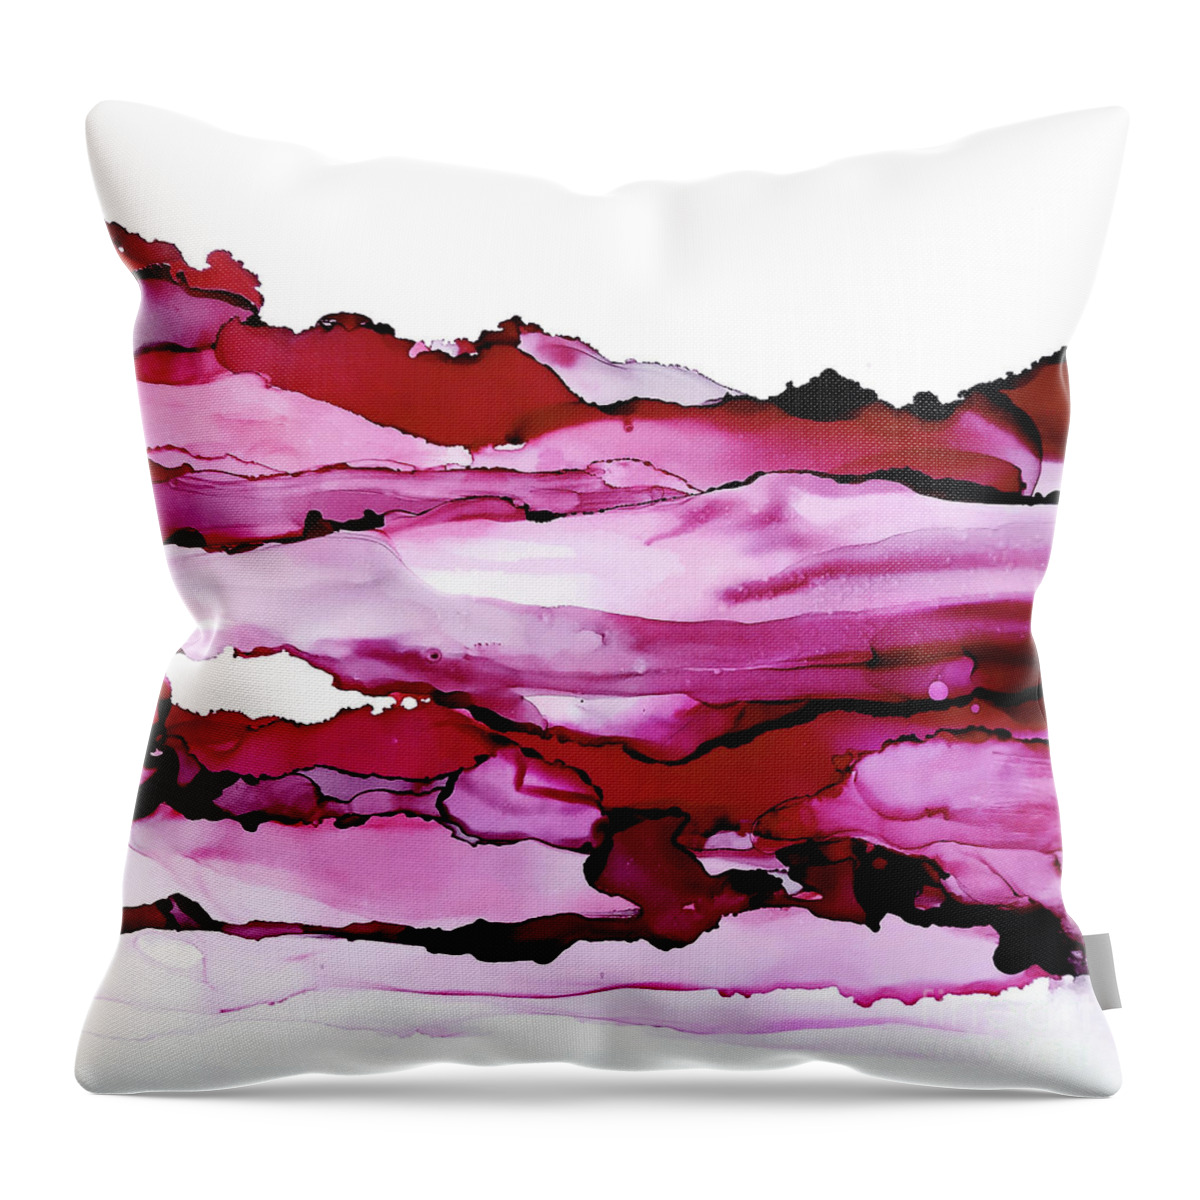 Alcohol Ink Throw Pillow featuring the painting Pinkscape 2 by Chris Paschke